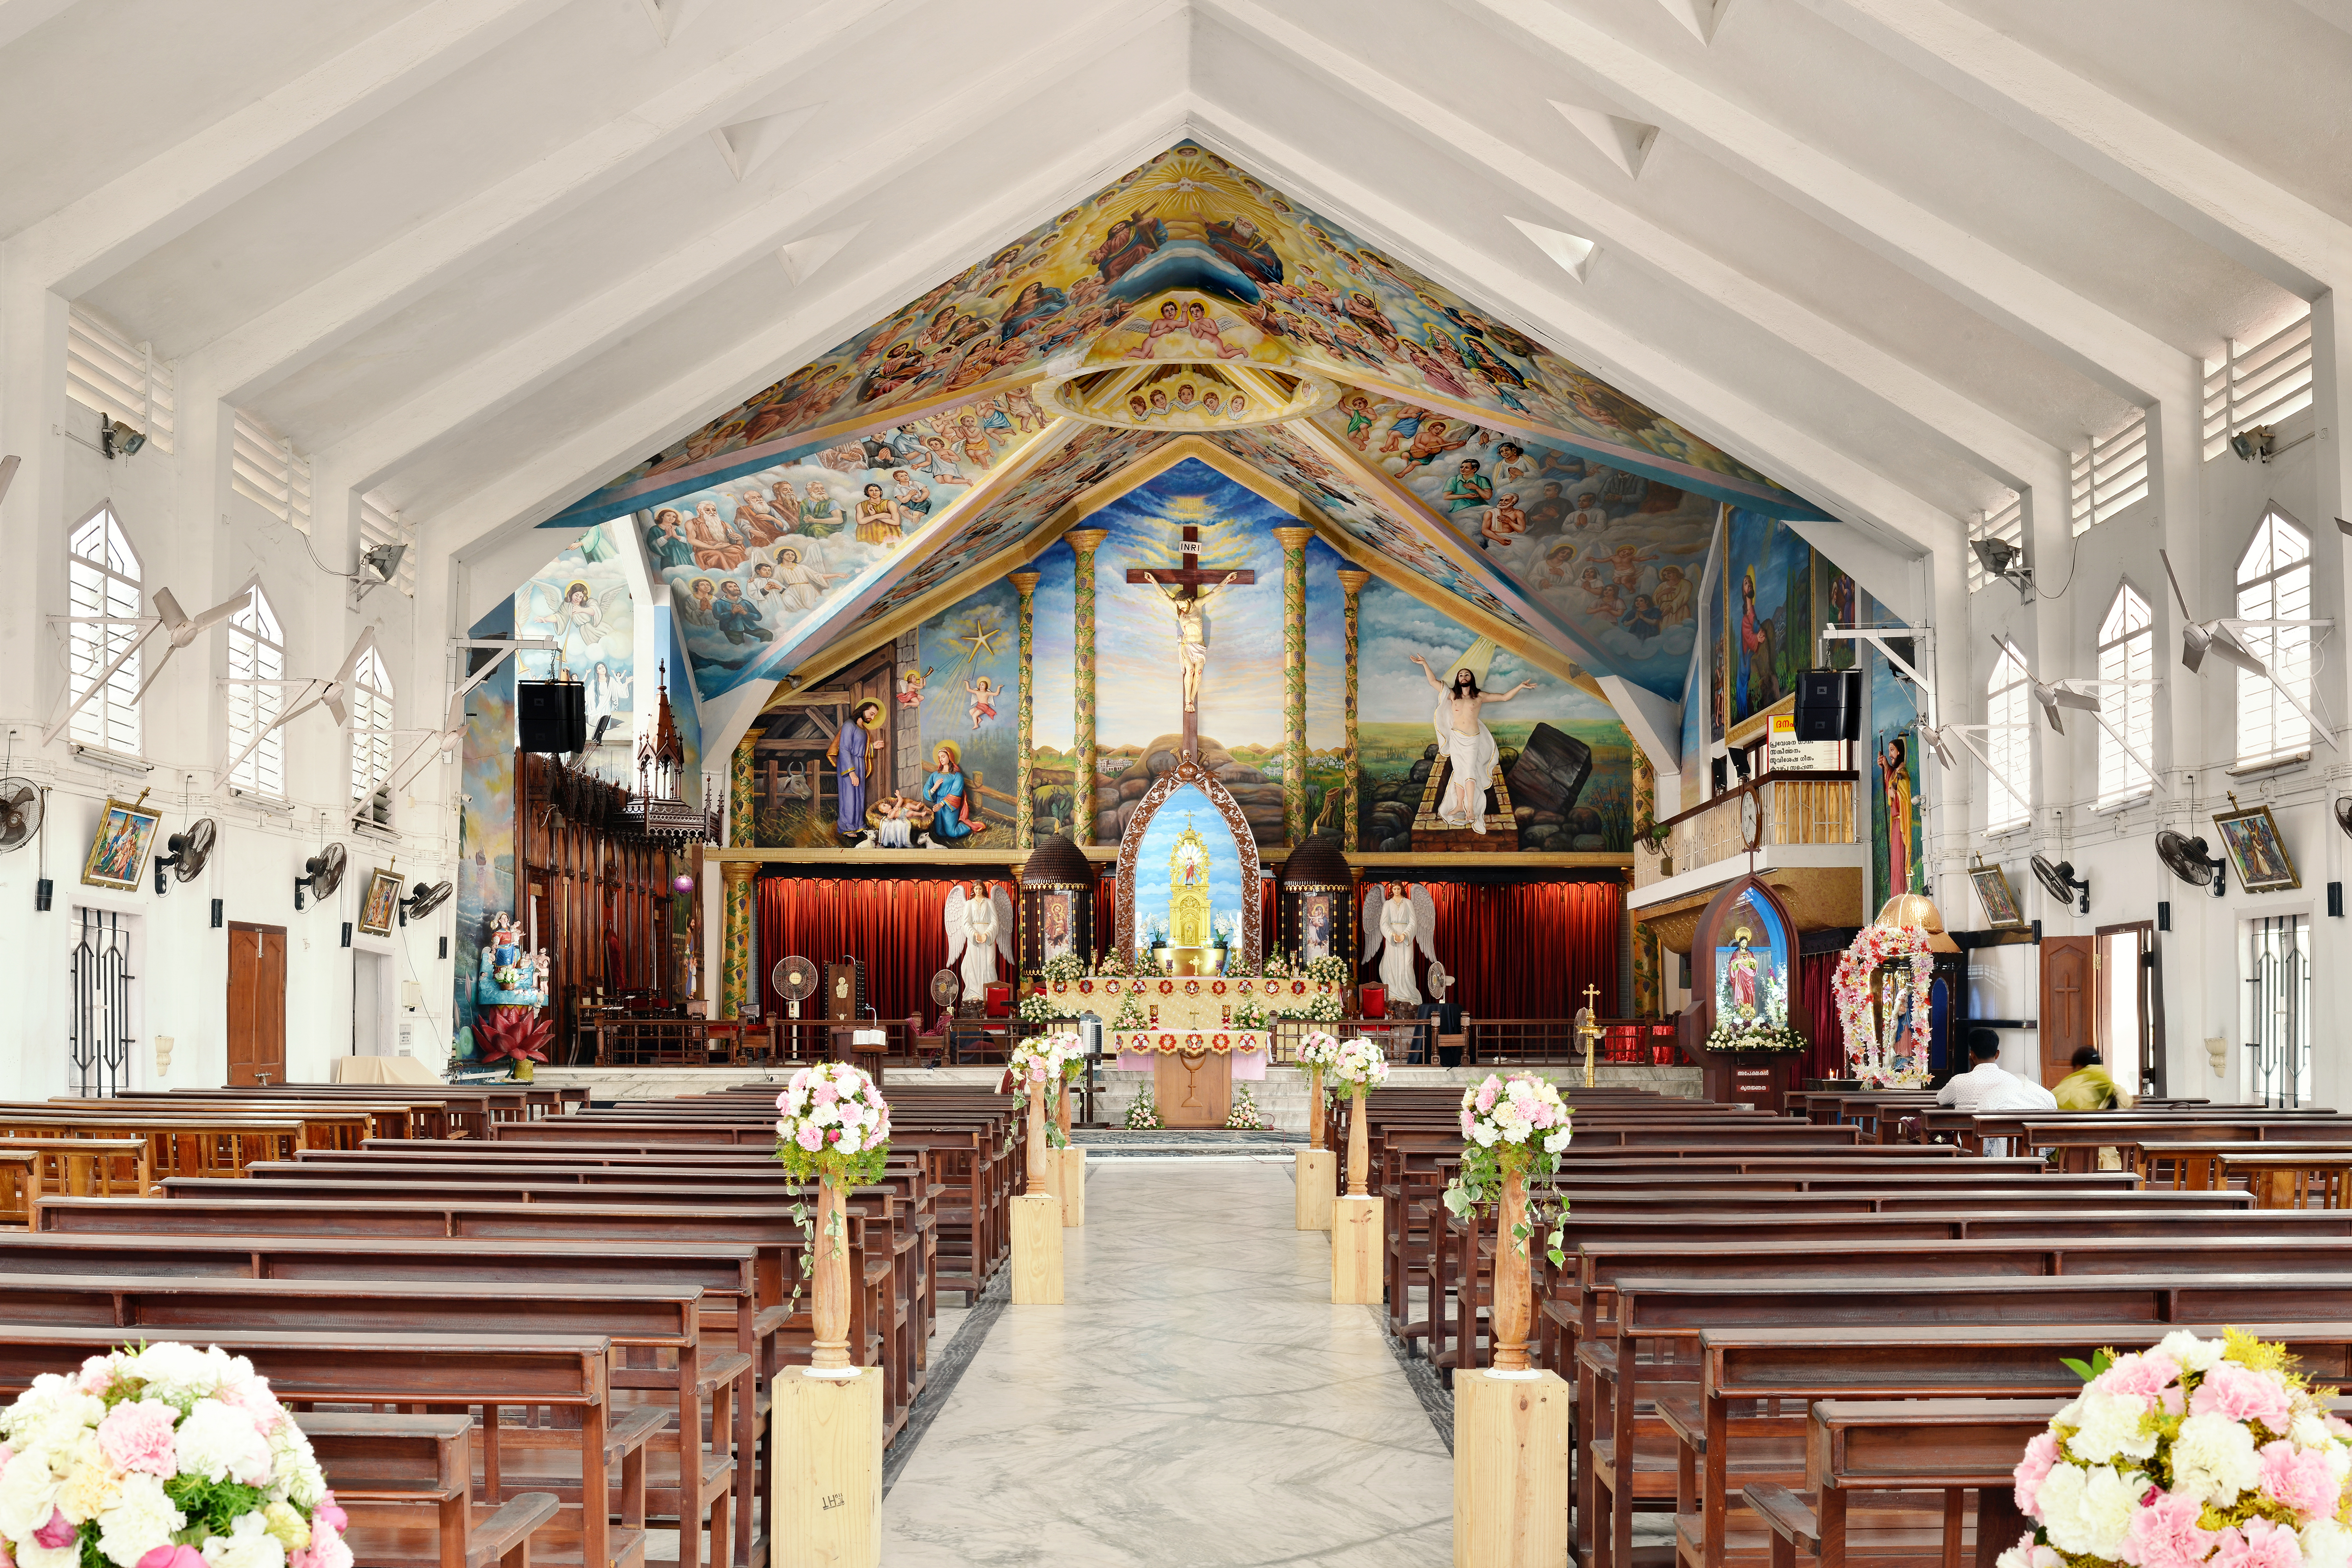 Sanctuary Fascinate Array File:St. Mary's Syro-Malabar Cathedral Basilica, Ernakulam by Augustus  Binu.jpg - Wikimedia Commons